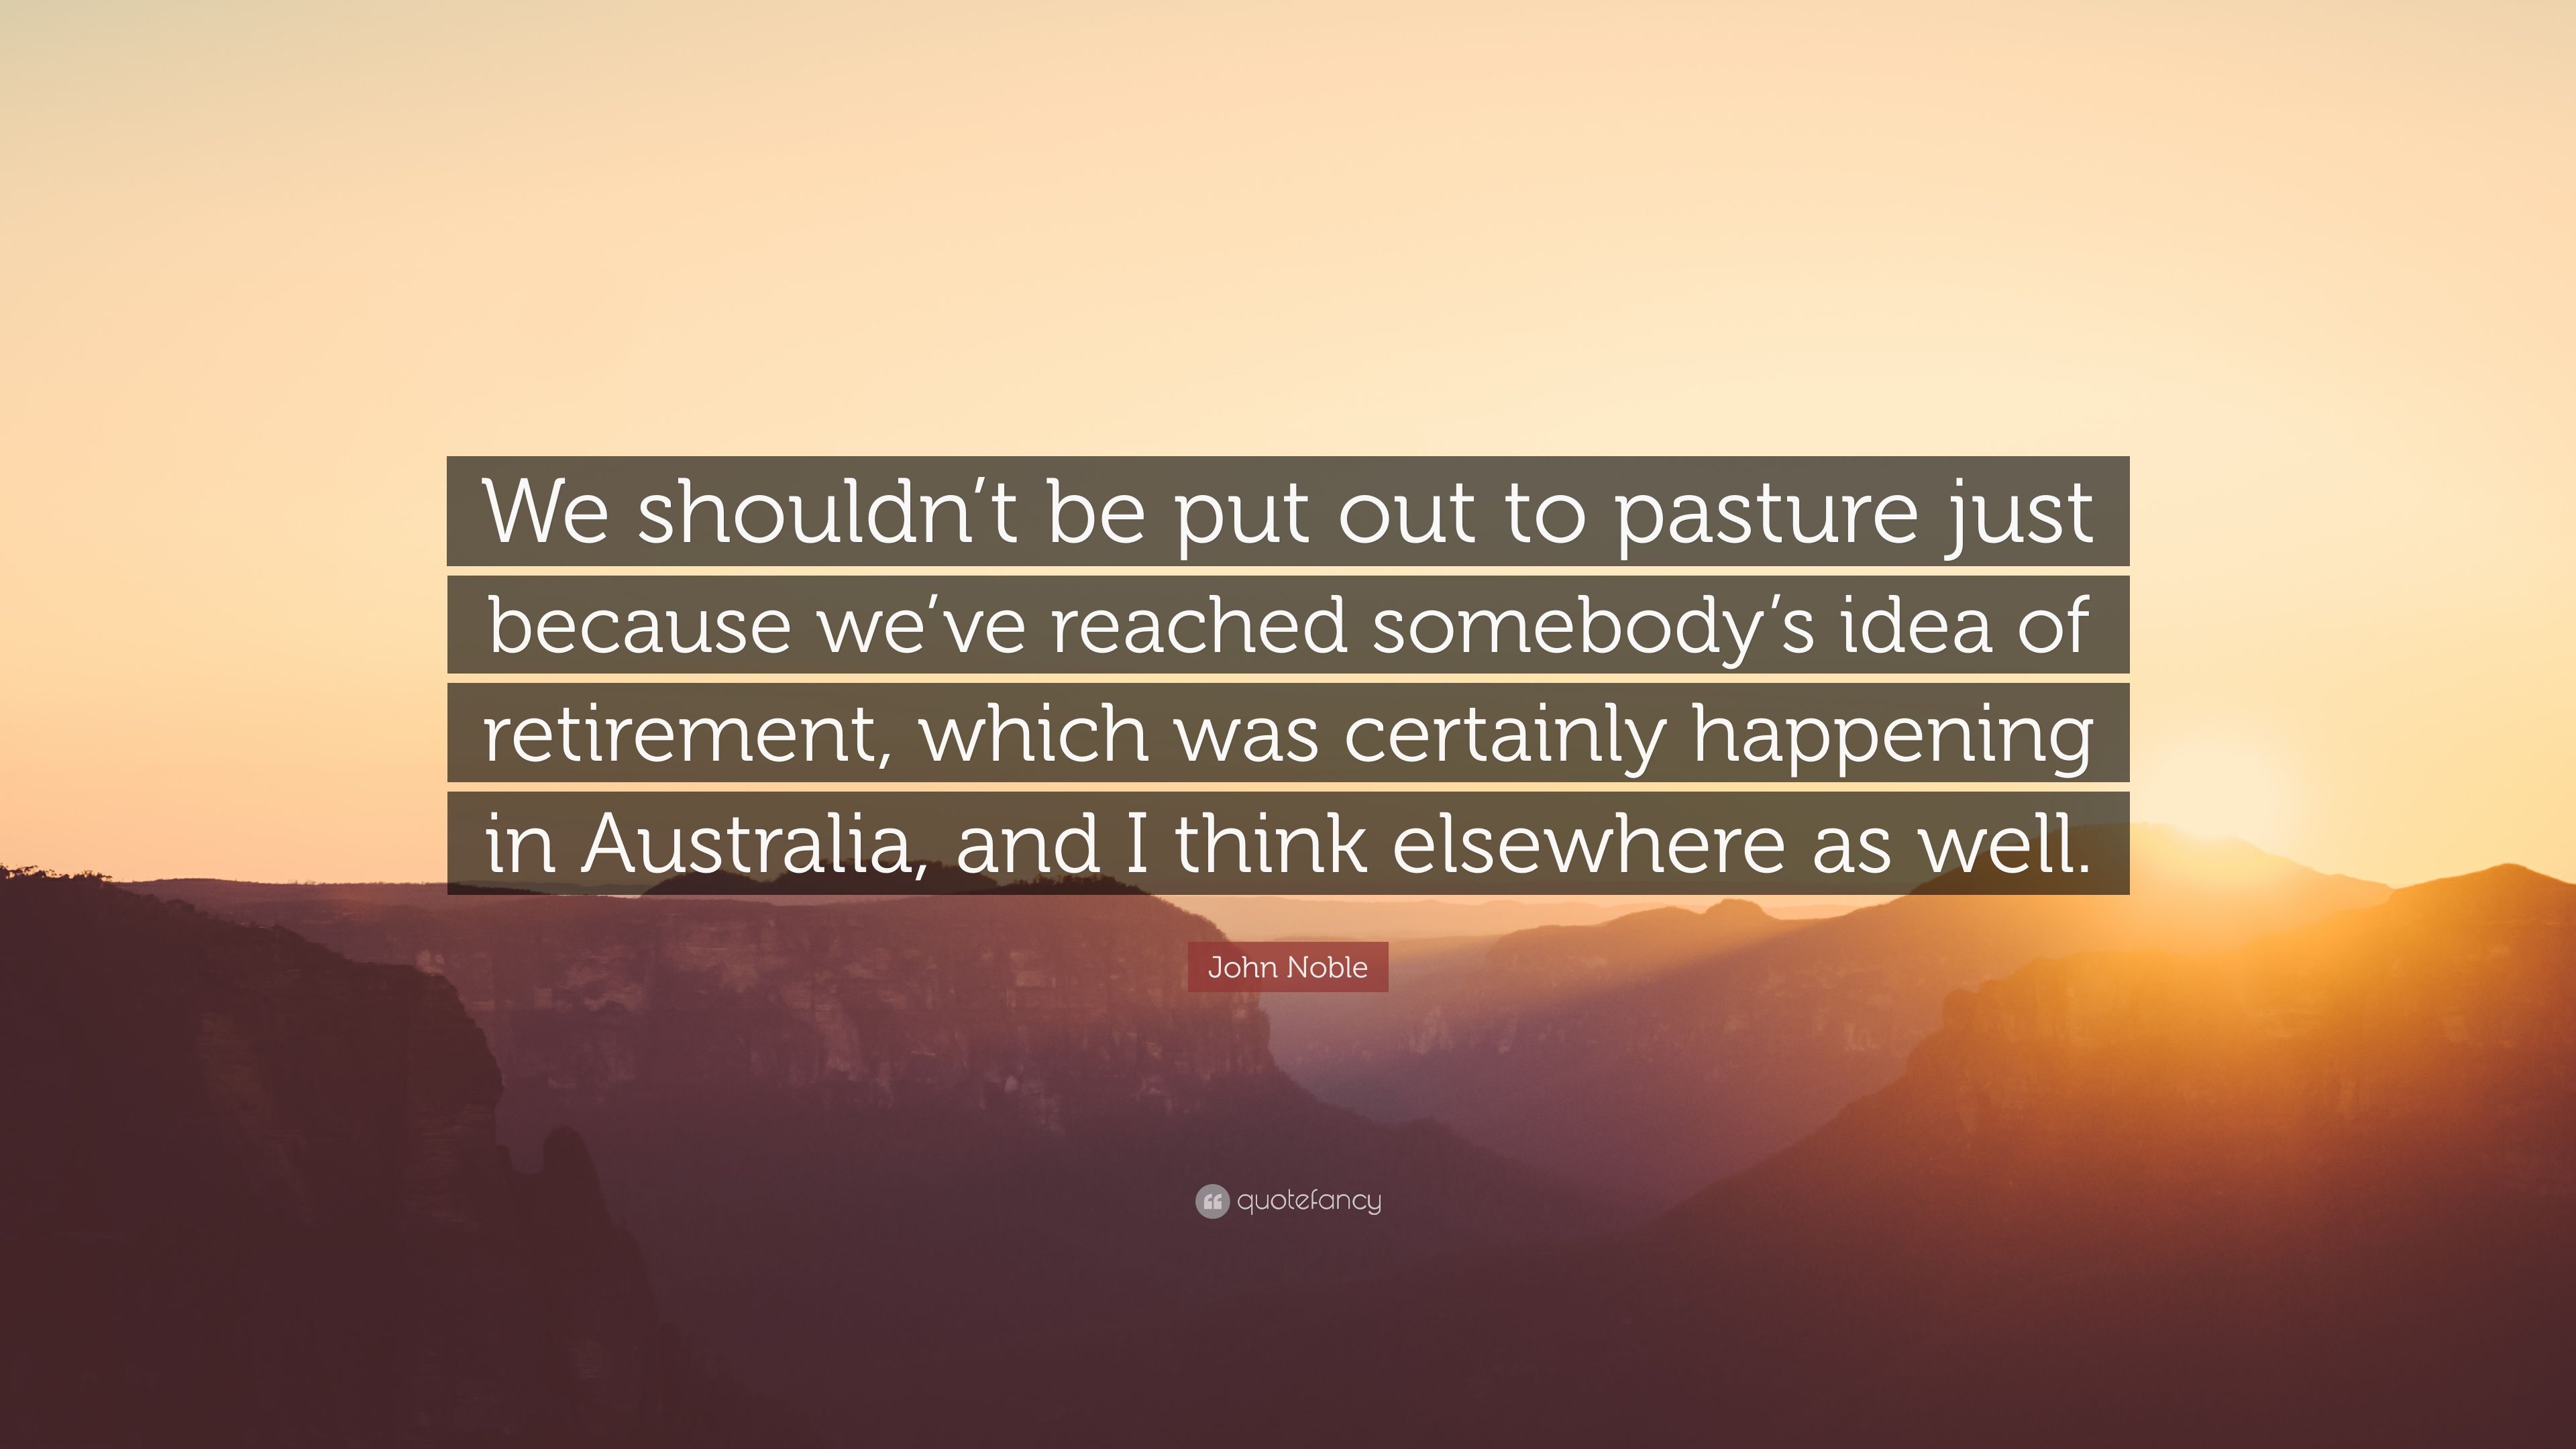 John Noble Quote: “We shouldn't be put out to pasture just because